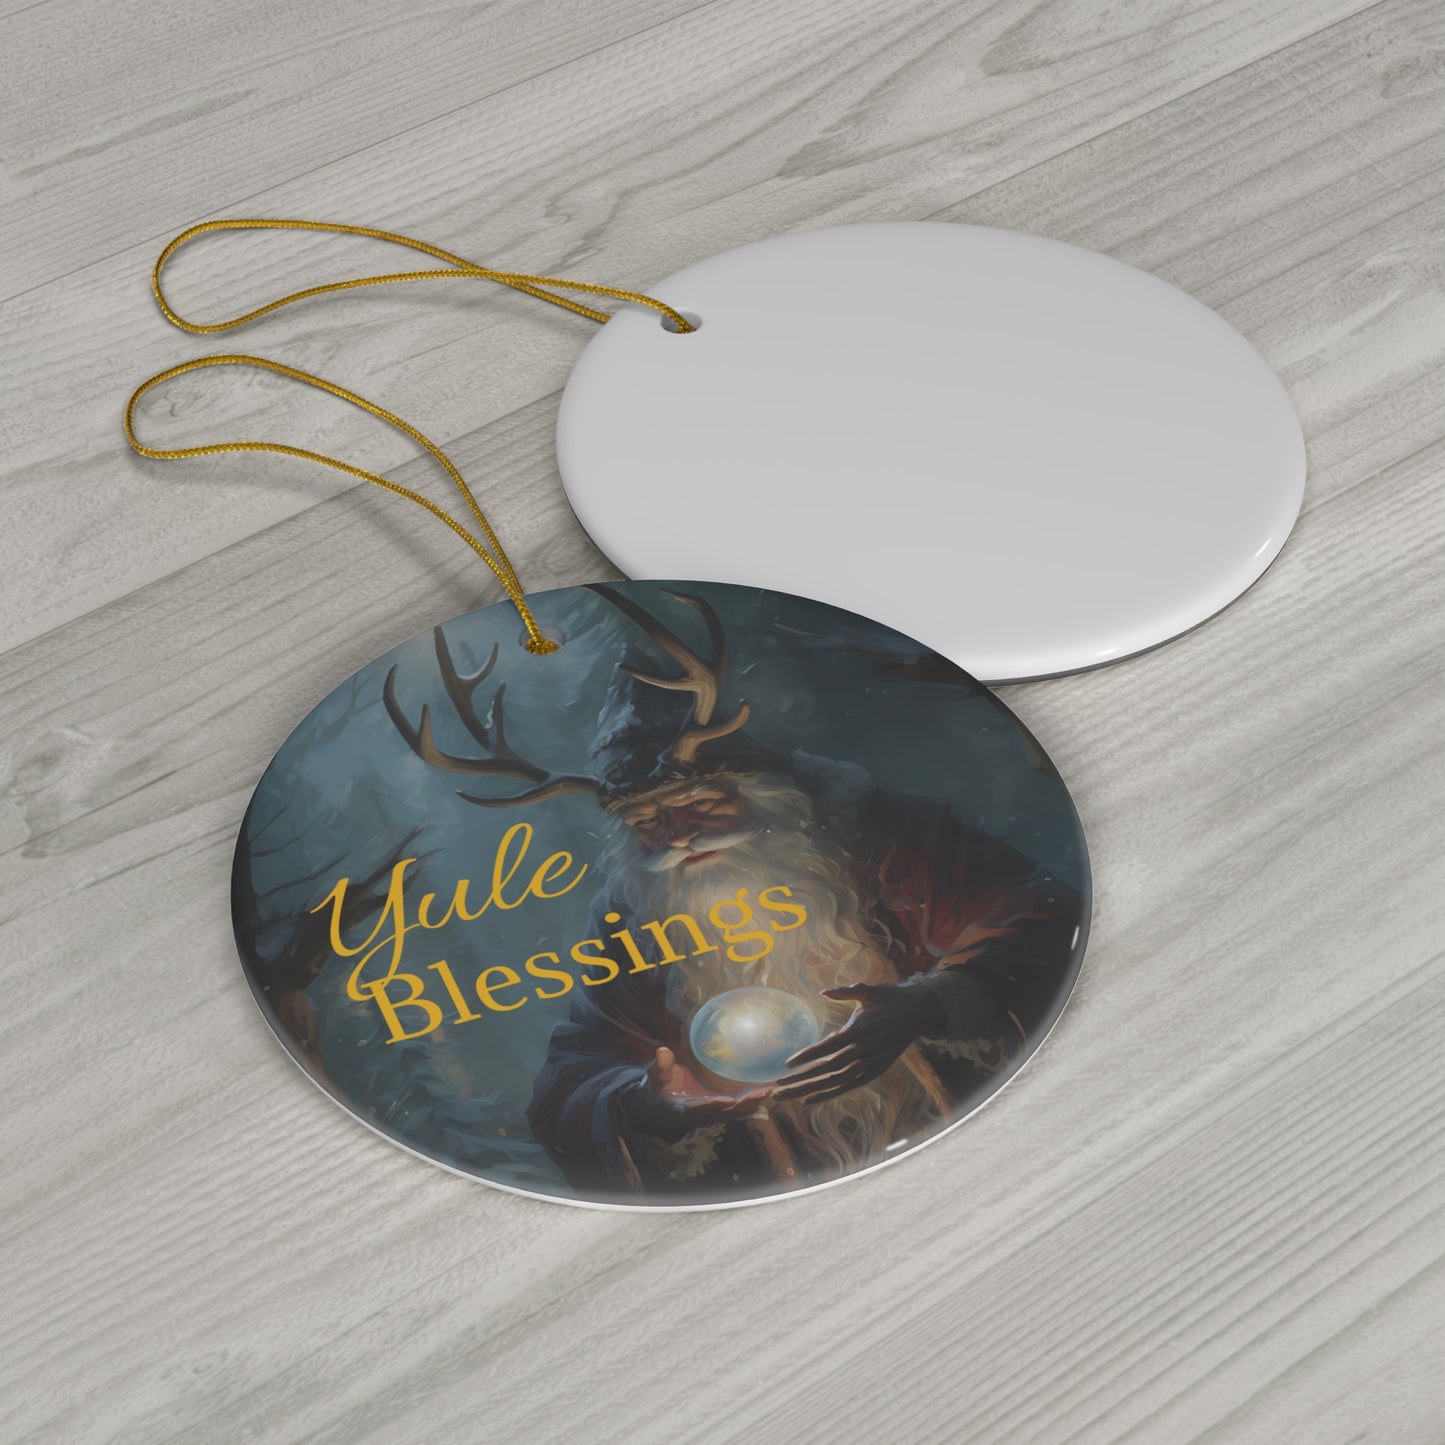 Yule Blessings | Father Yule, Ceramic Yule Ornaments, Pagan,  Yule Decor, Witchy Ornaments, Christmas, Gift, Witchcraft, Wiccan